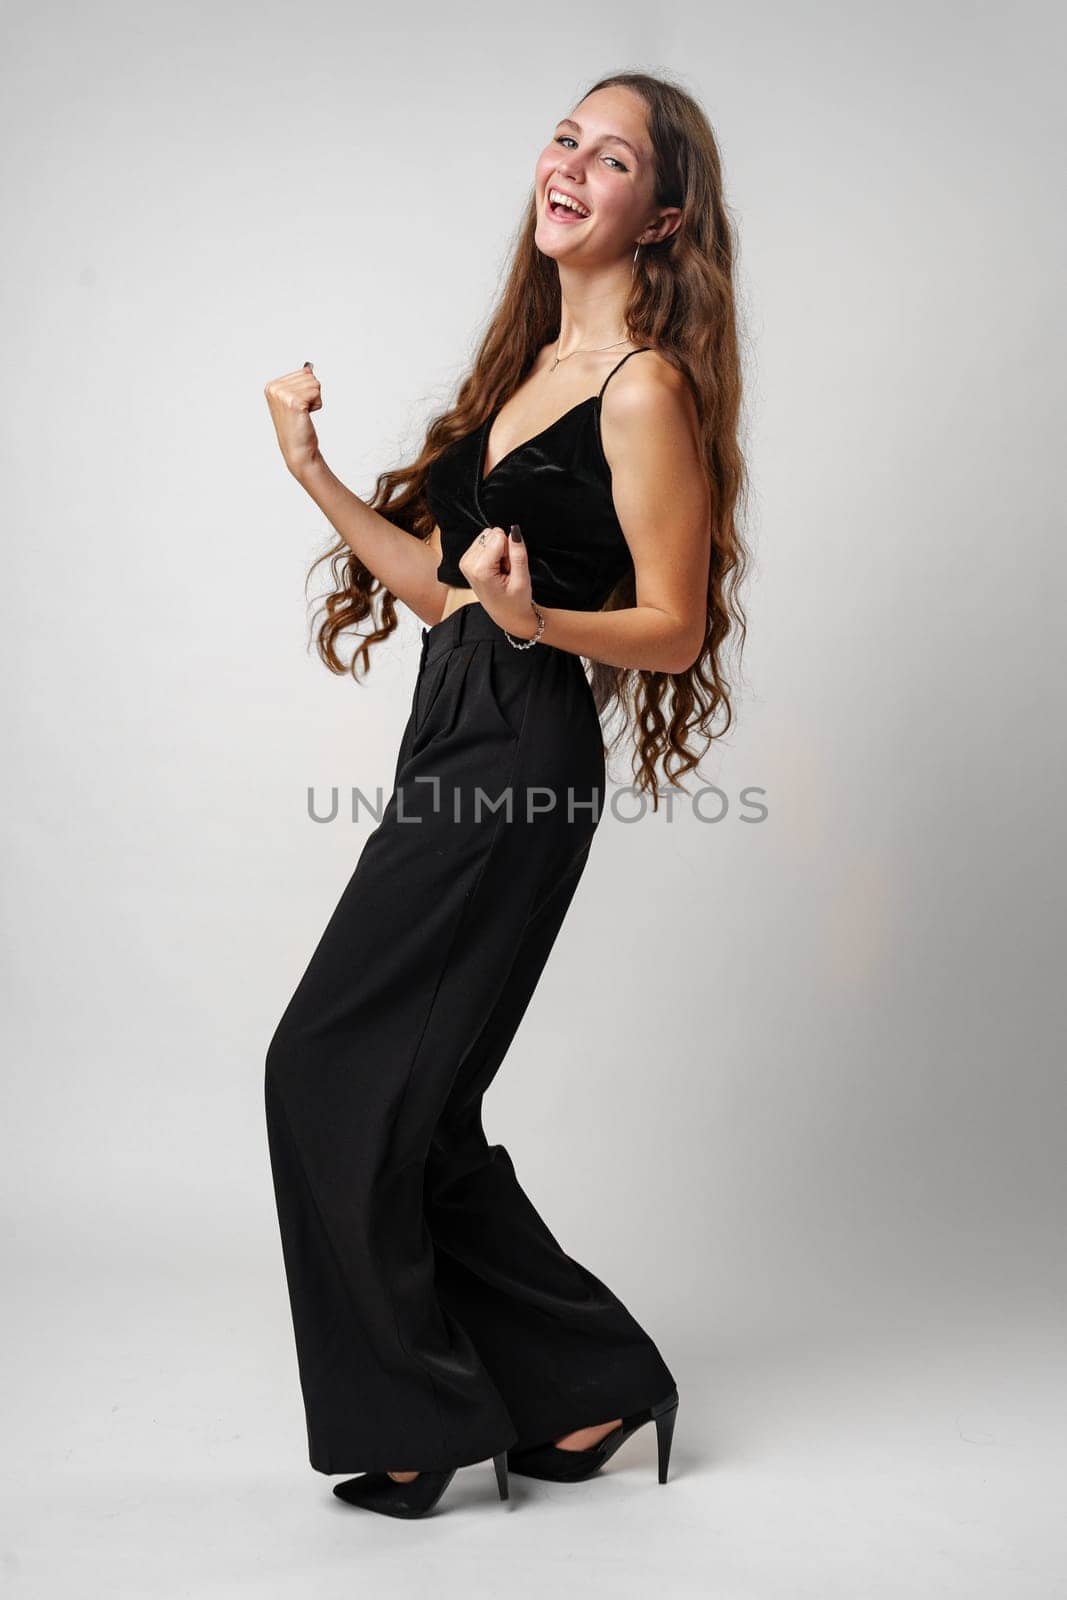 A radiant young woman with long hair is captured in a moment of celebration, wearing an elegant black dress with a sleeveless top and full-length skirt. She appears to be dancing or celebrating, with an ecstatic expression on her face and her hands raised in a gesture of excitement. The background is simple and neutral, highlighting the subjects joyous demeanor and stylish attire.